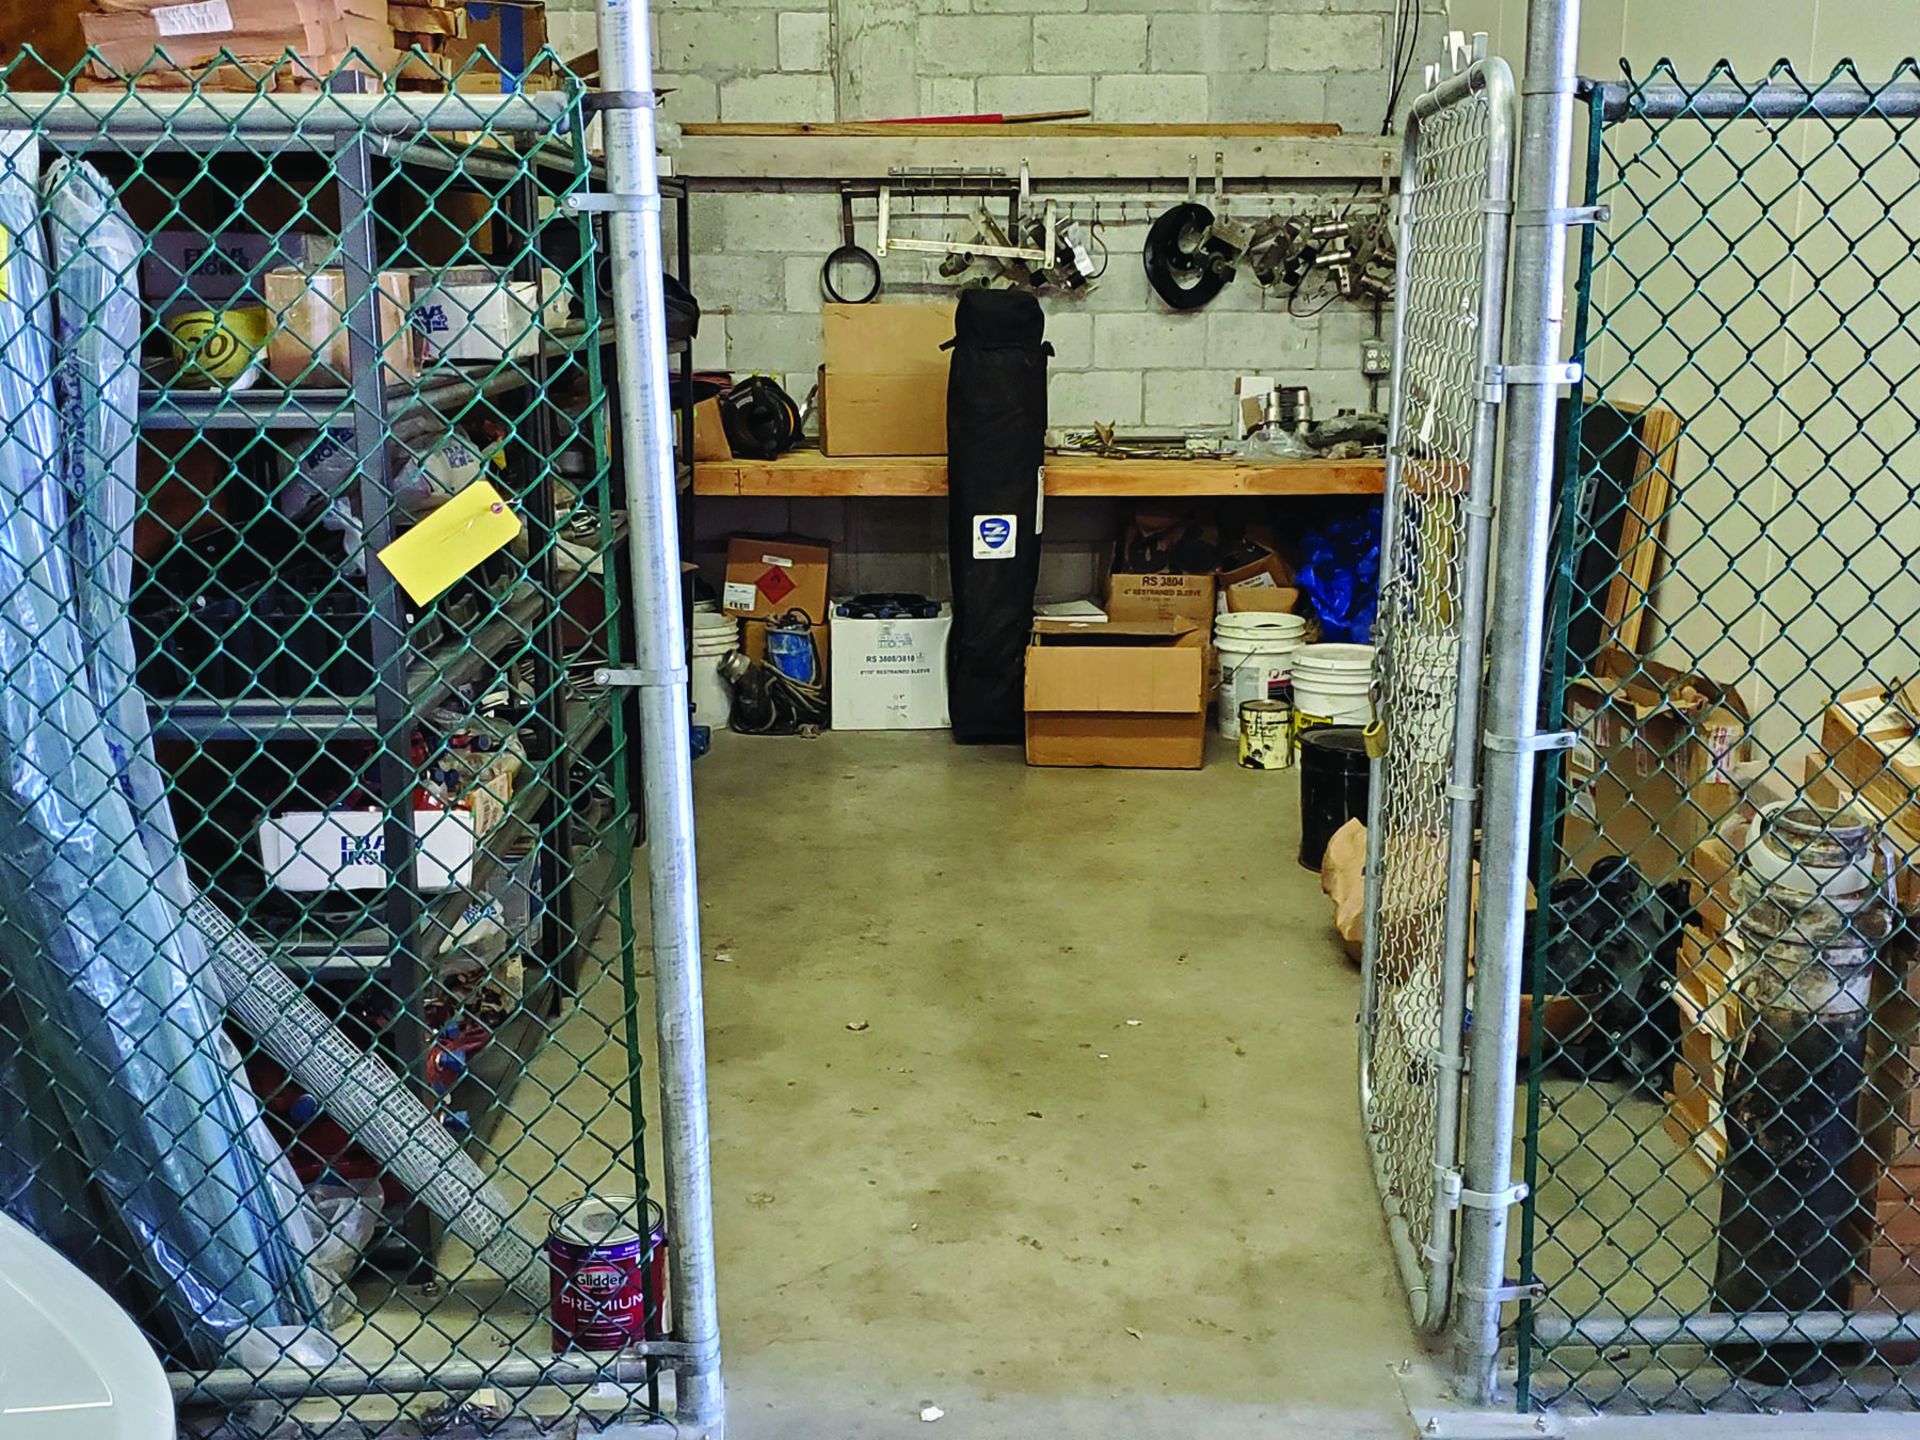 ALL CAST IRON PIPE & FITTING AND SURROUNDING ITEMS/PALLET RACK WITH CRIB HARDWARE, COUPLINGS, - Image 5 of 20